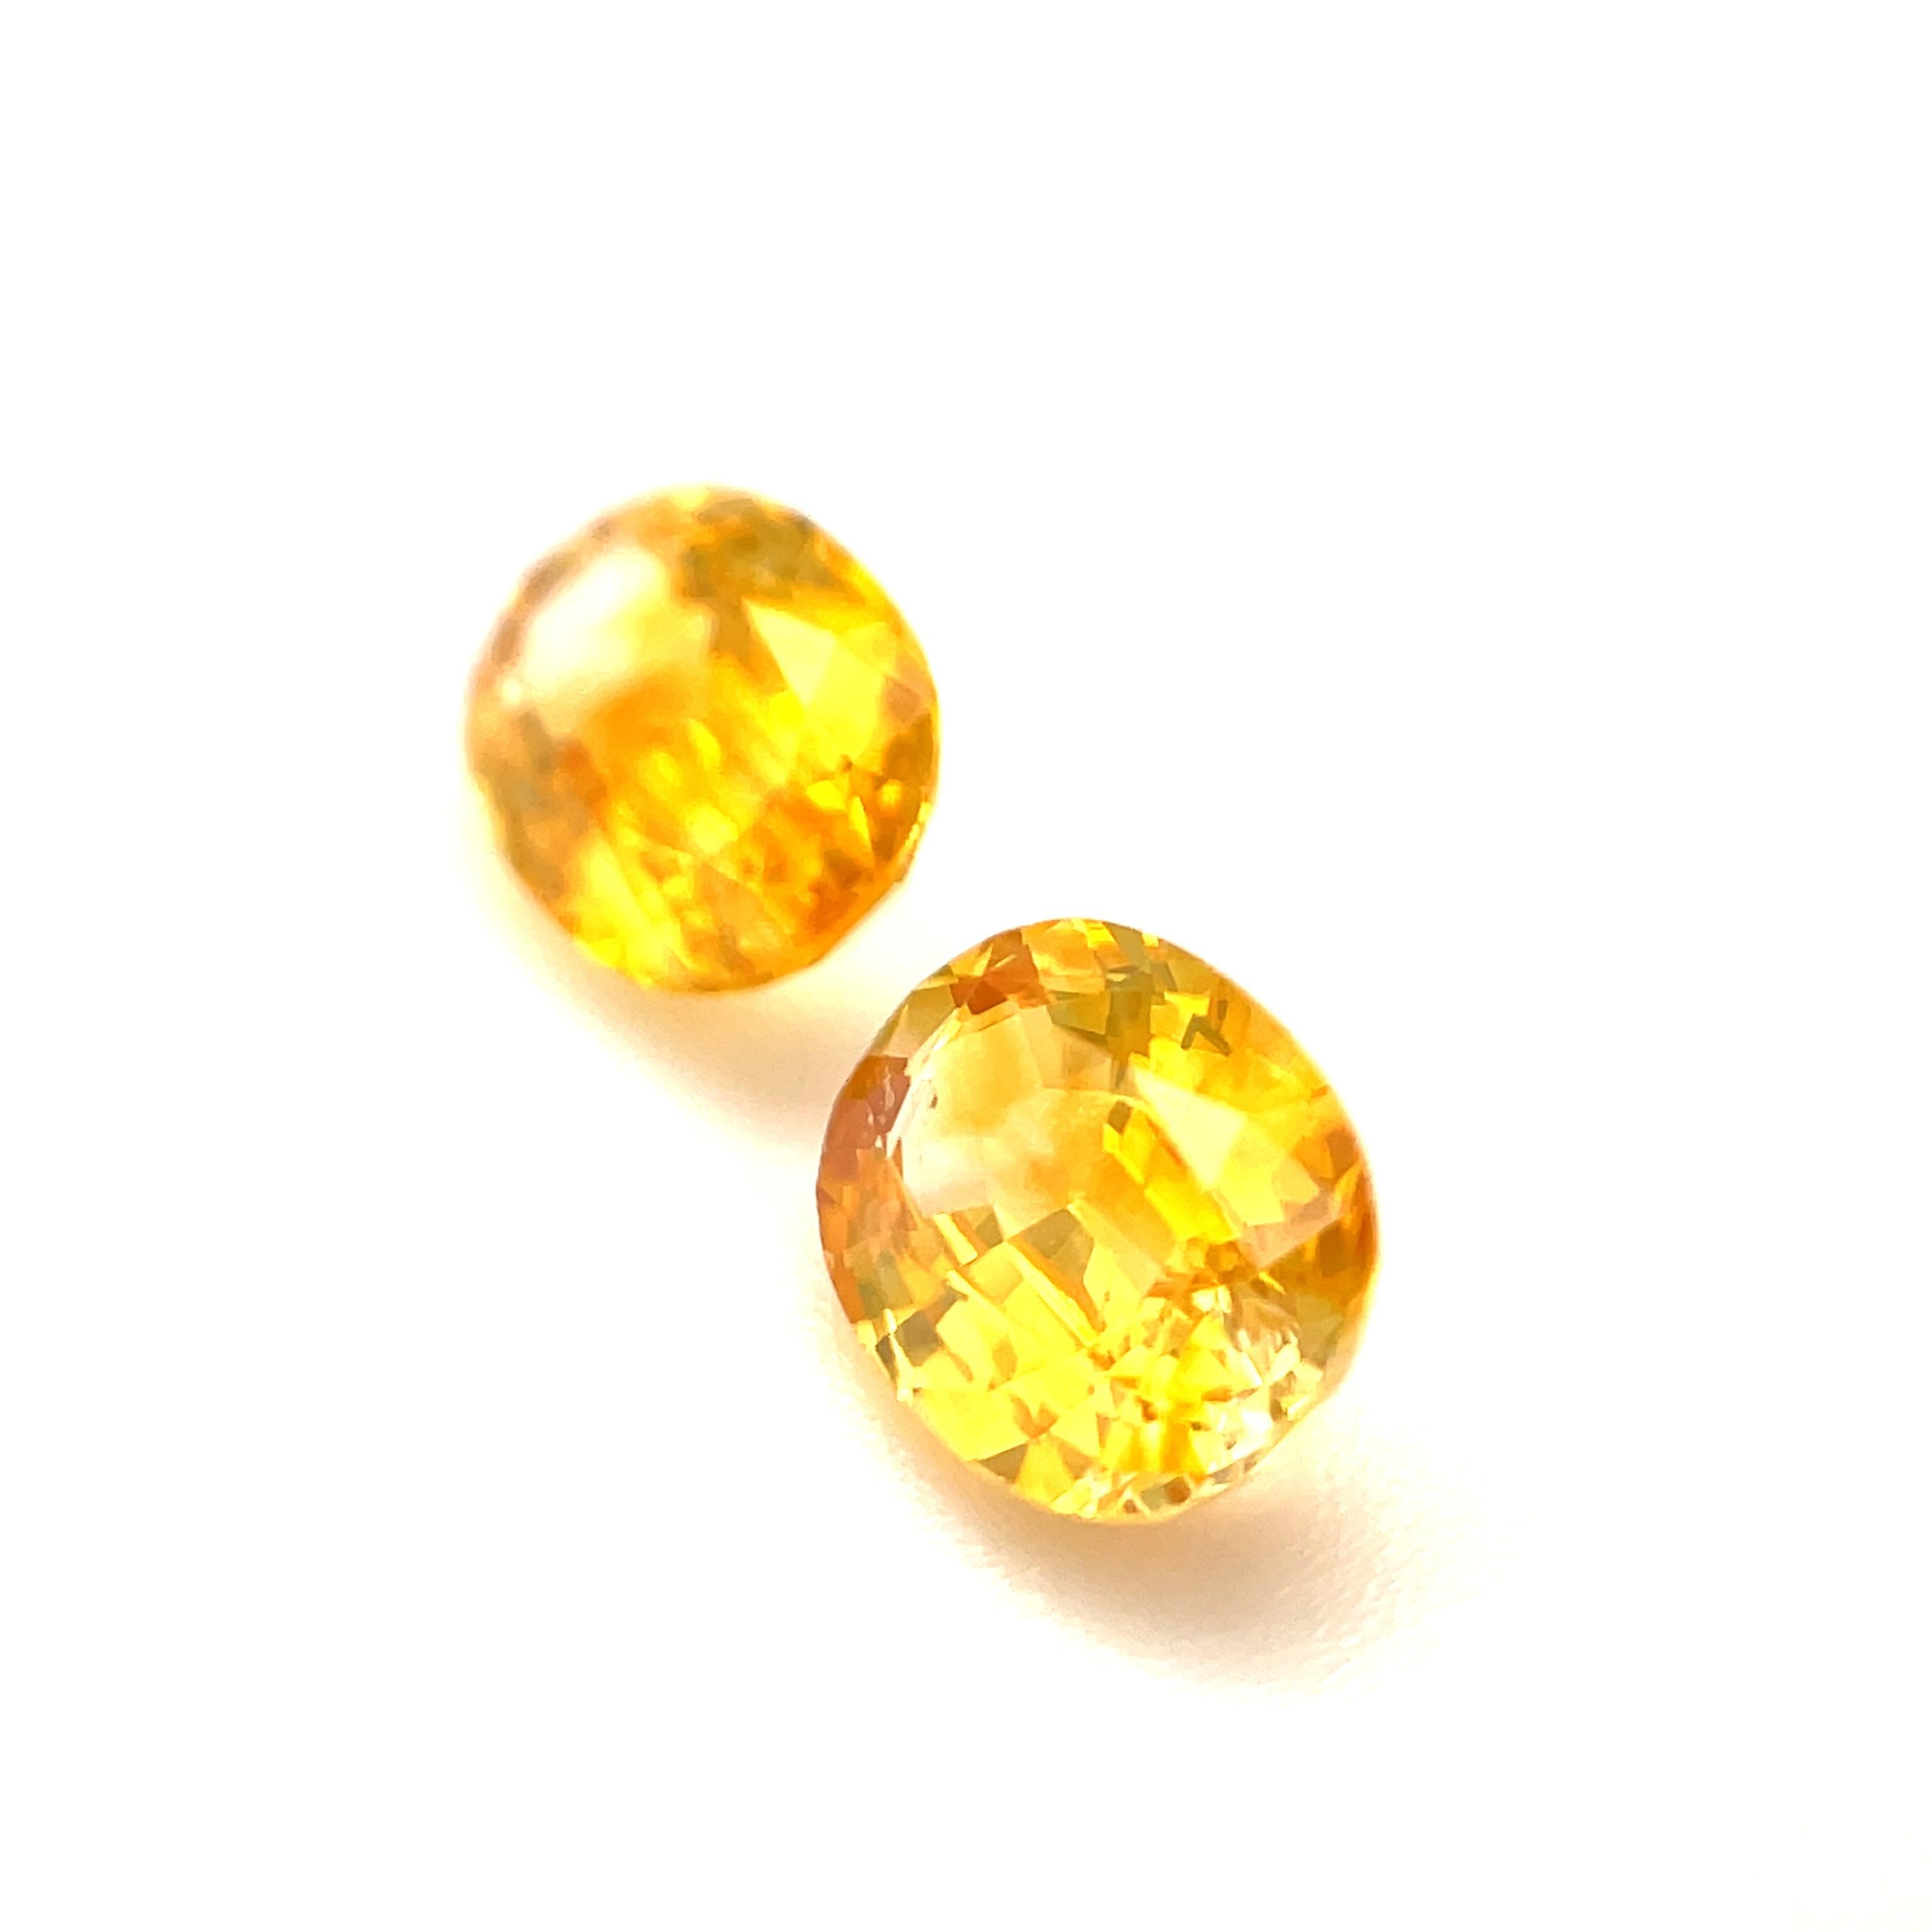 where do yellow sapphires come from